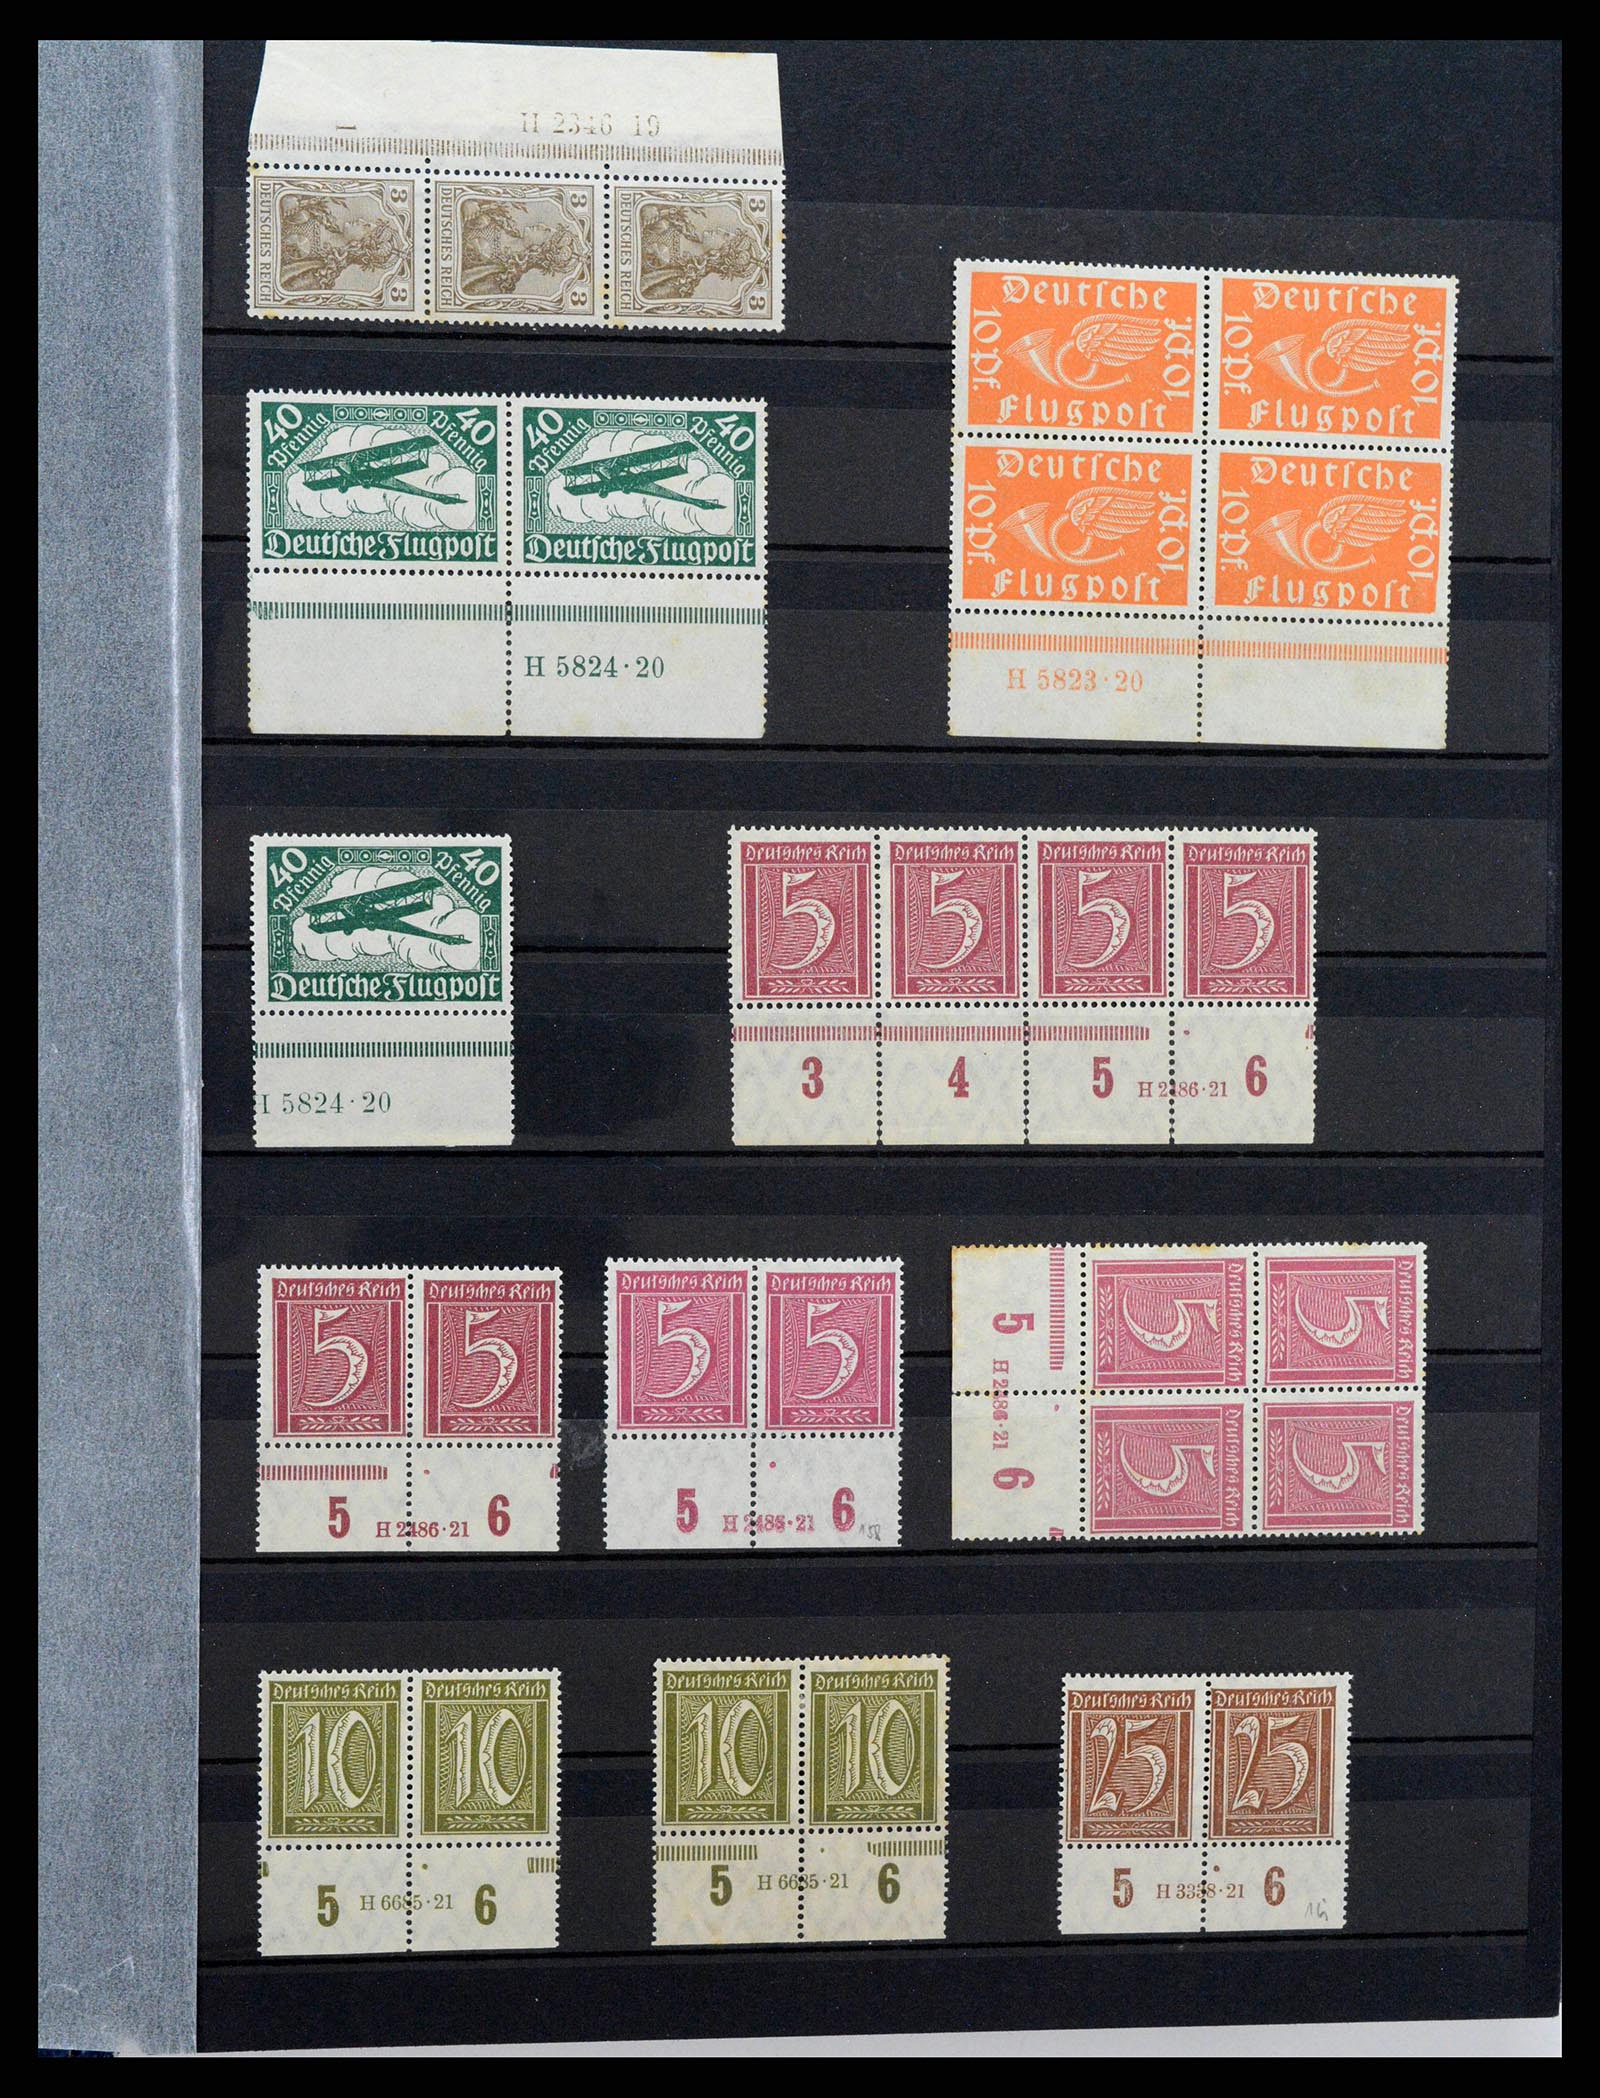 38417 0001 - Stamp collection 38417 German Reich infla 1922-1923.